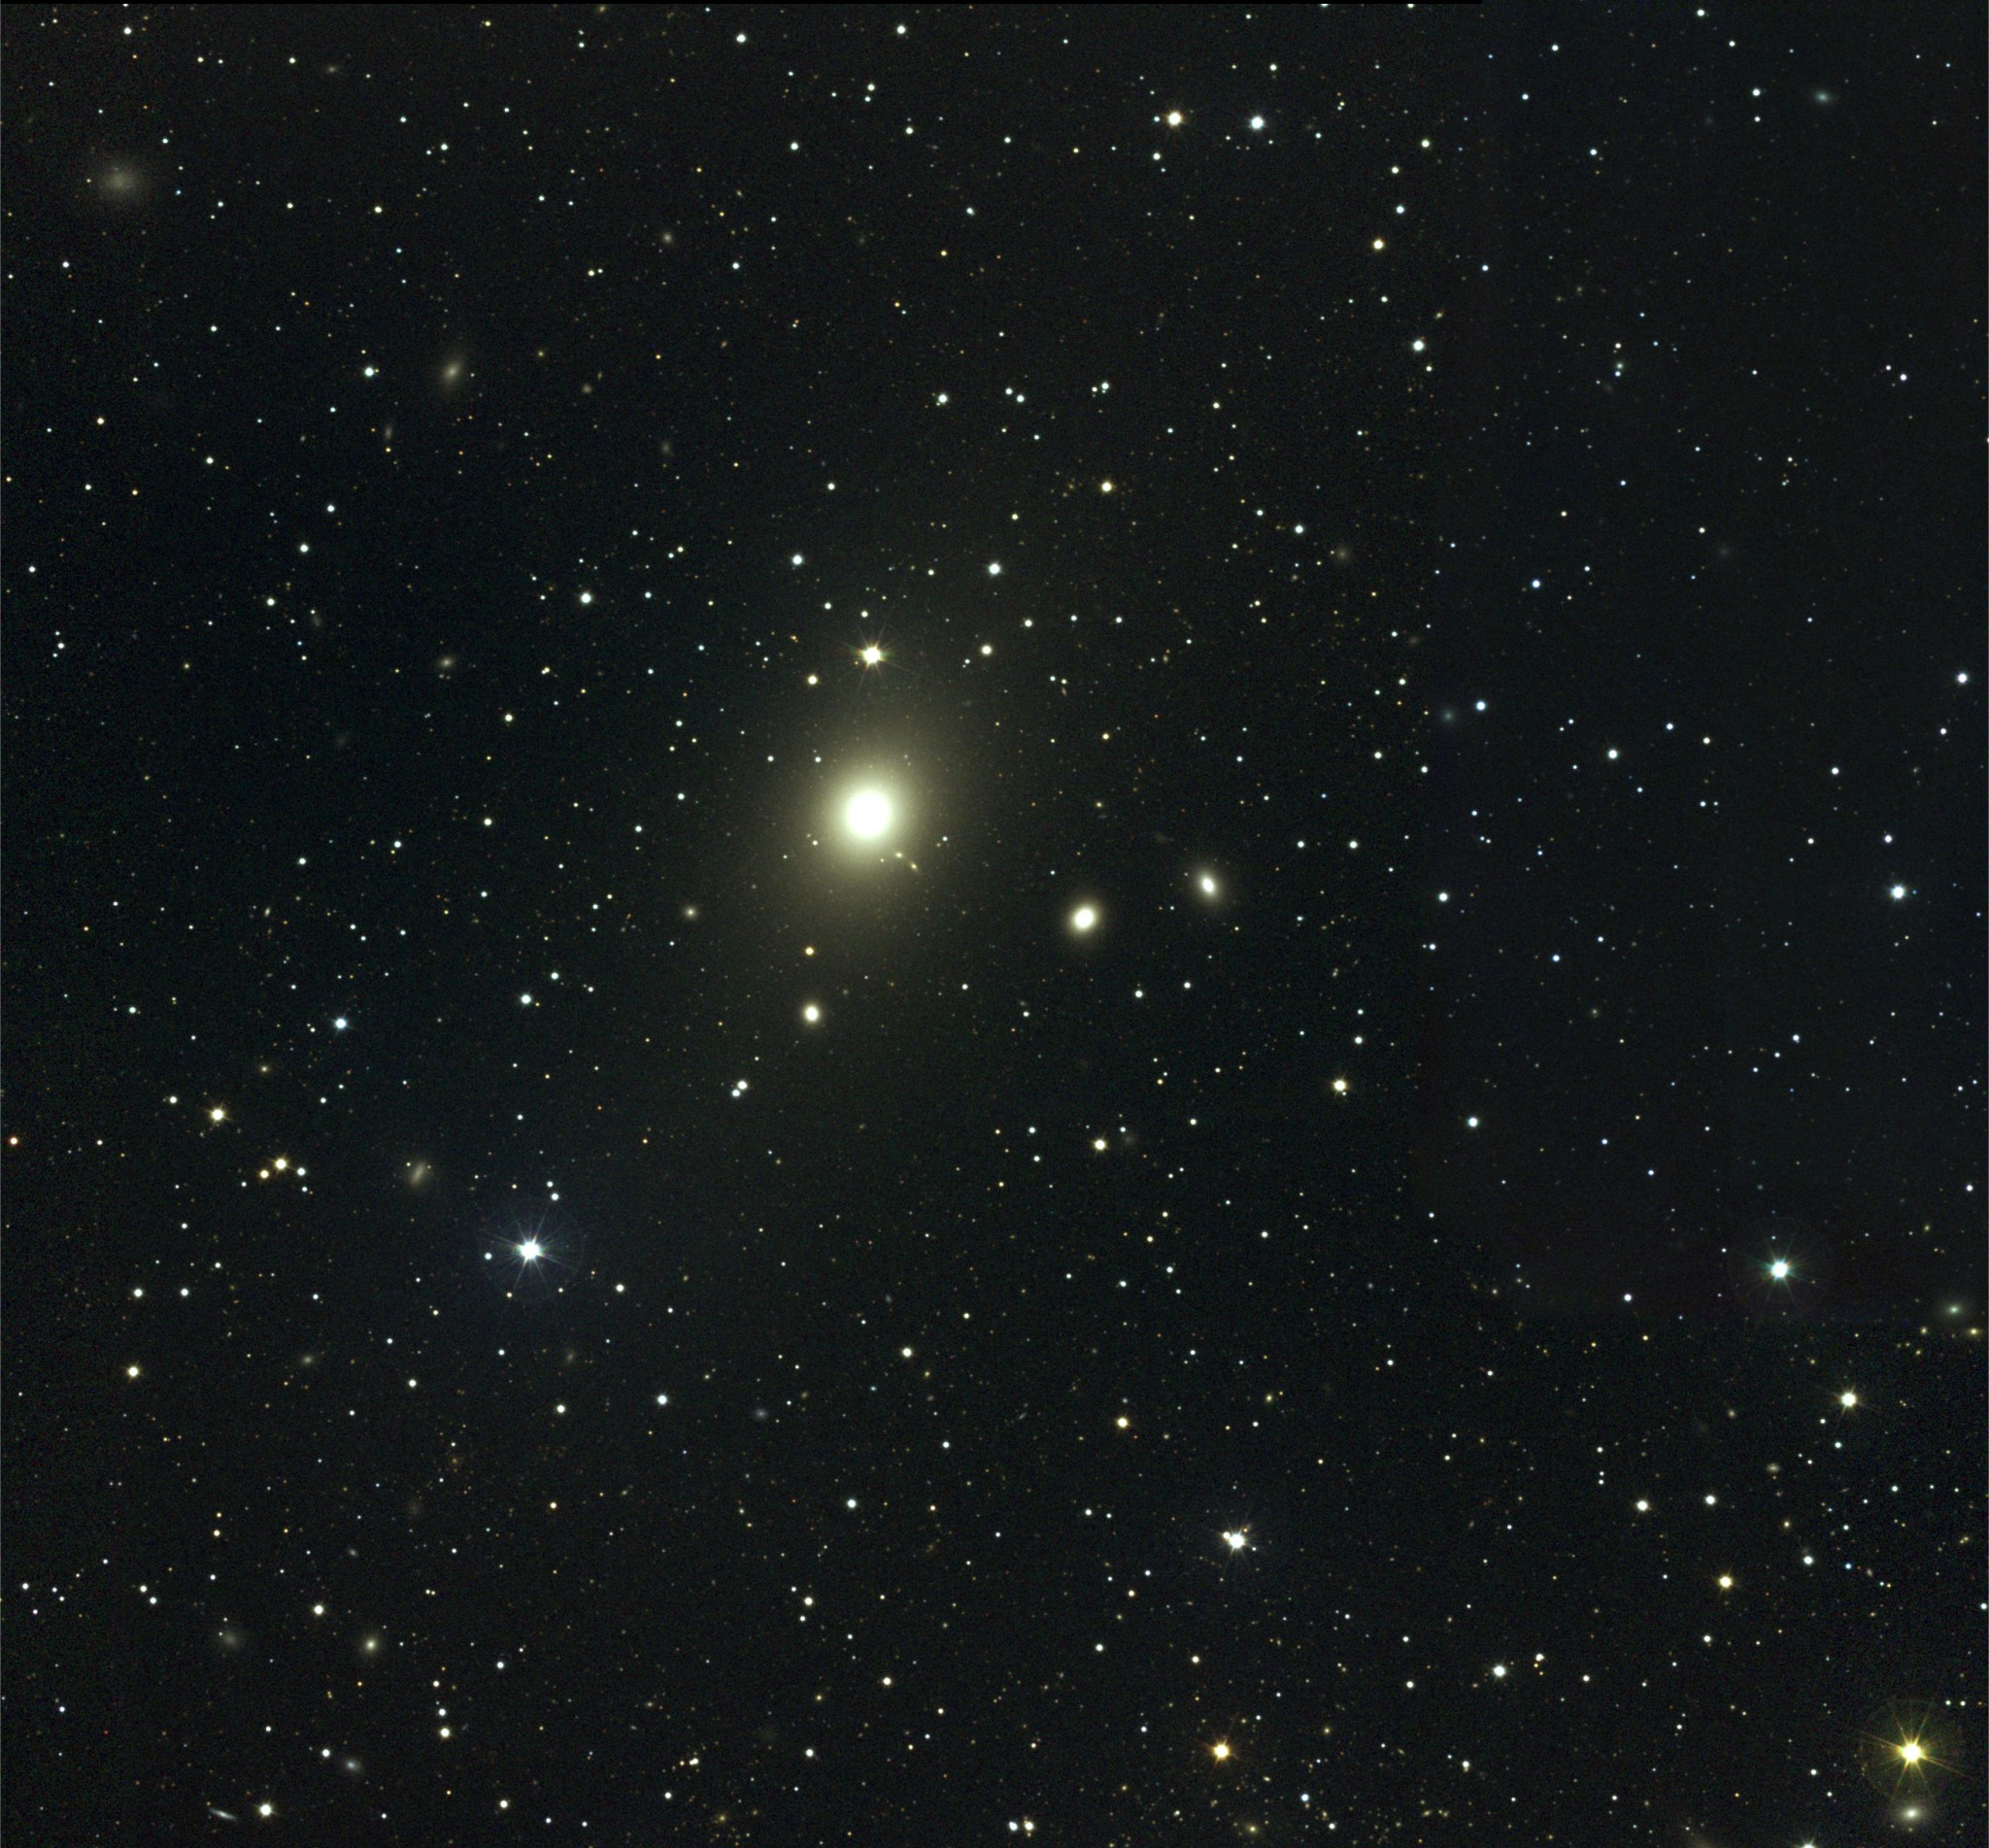 This visible light view shows the central part of the Virgo Cluster. The brightest object is the giant elliptical galaxy M87.